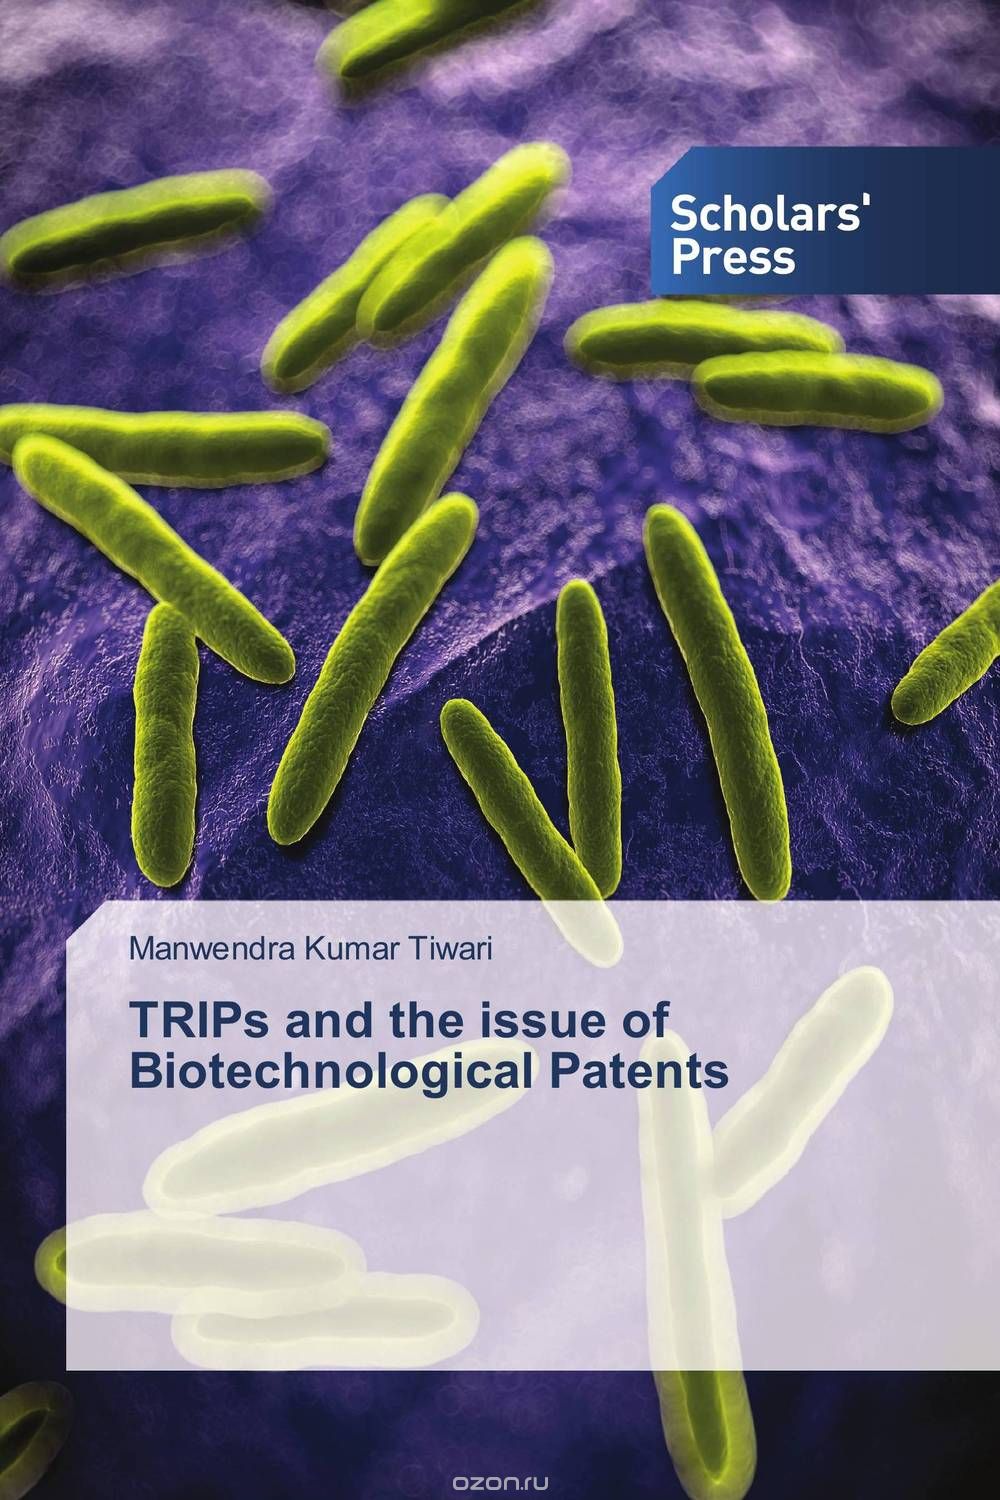 TRIPs and the issue of Biotechnological Patents